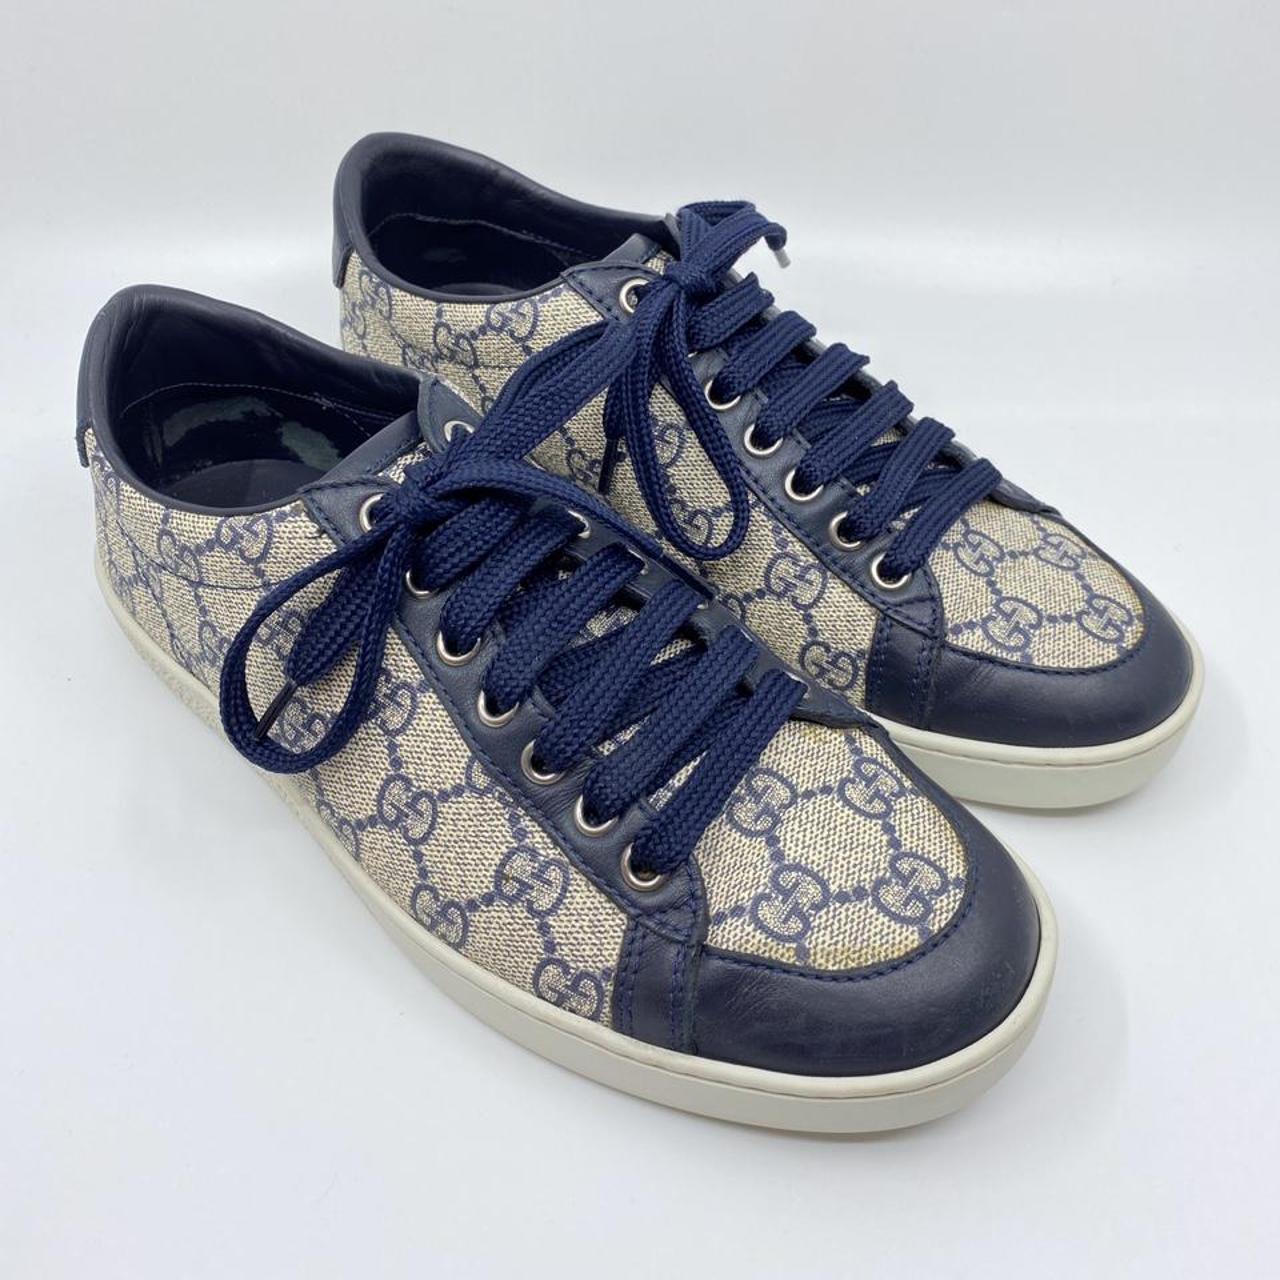 Gucci Women's Cream and Navy Trainers